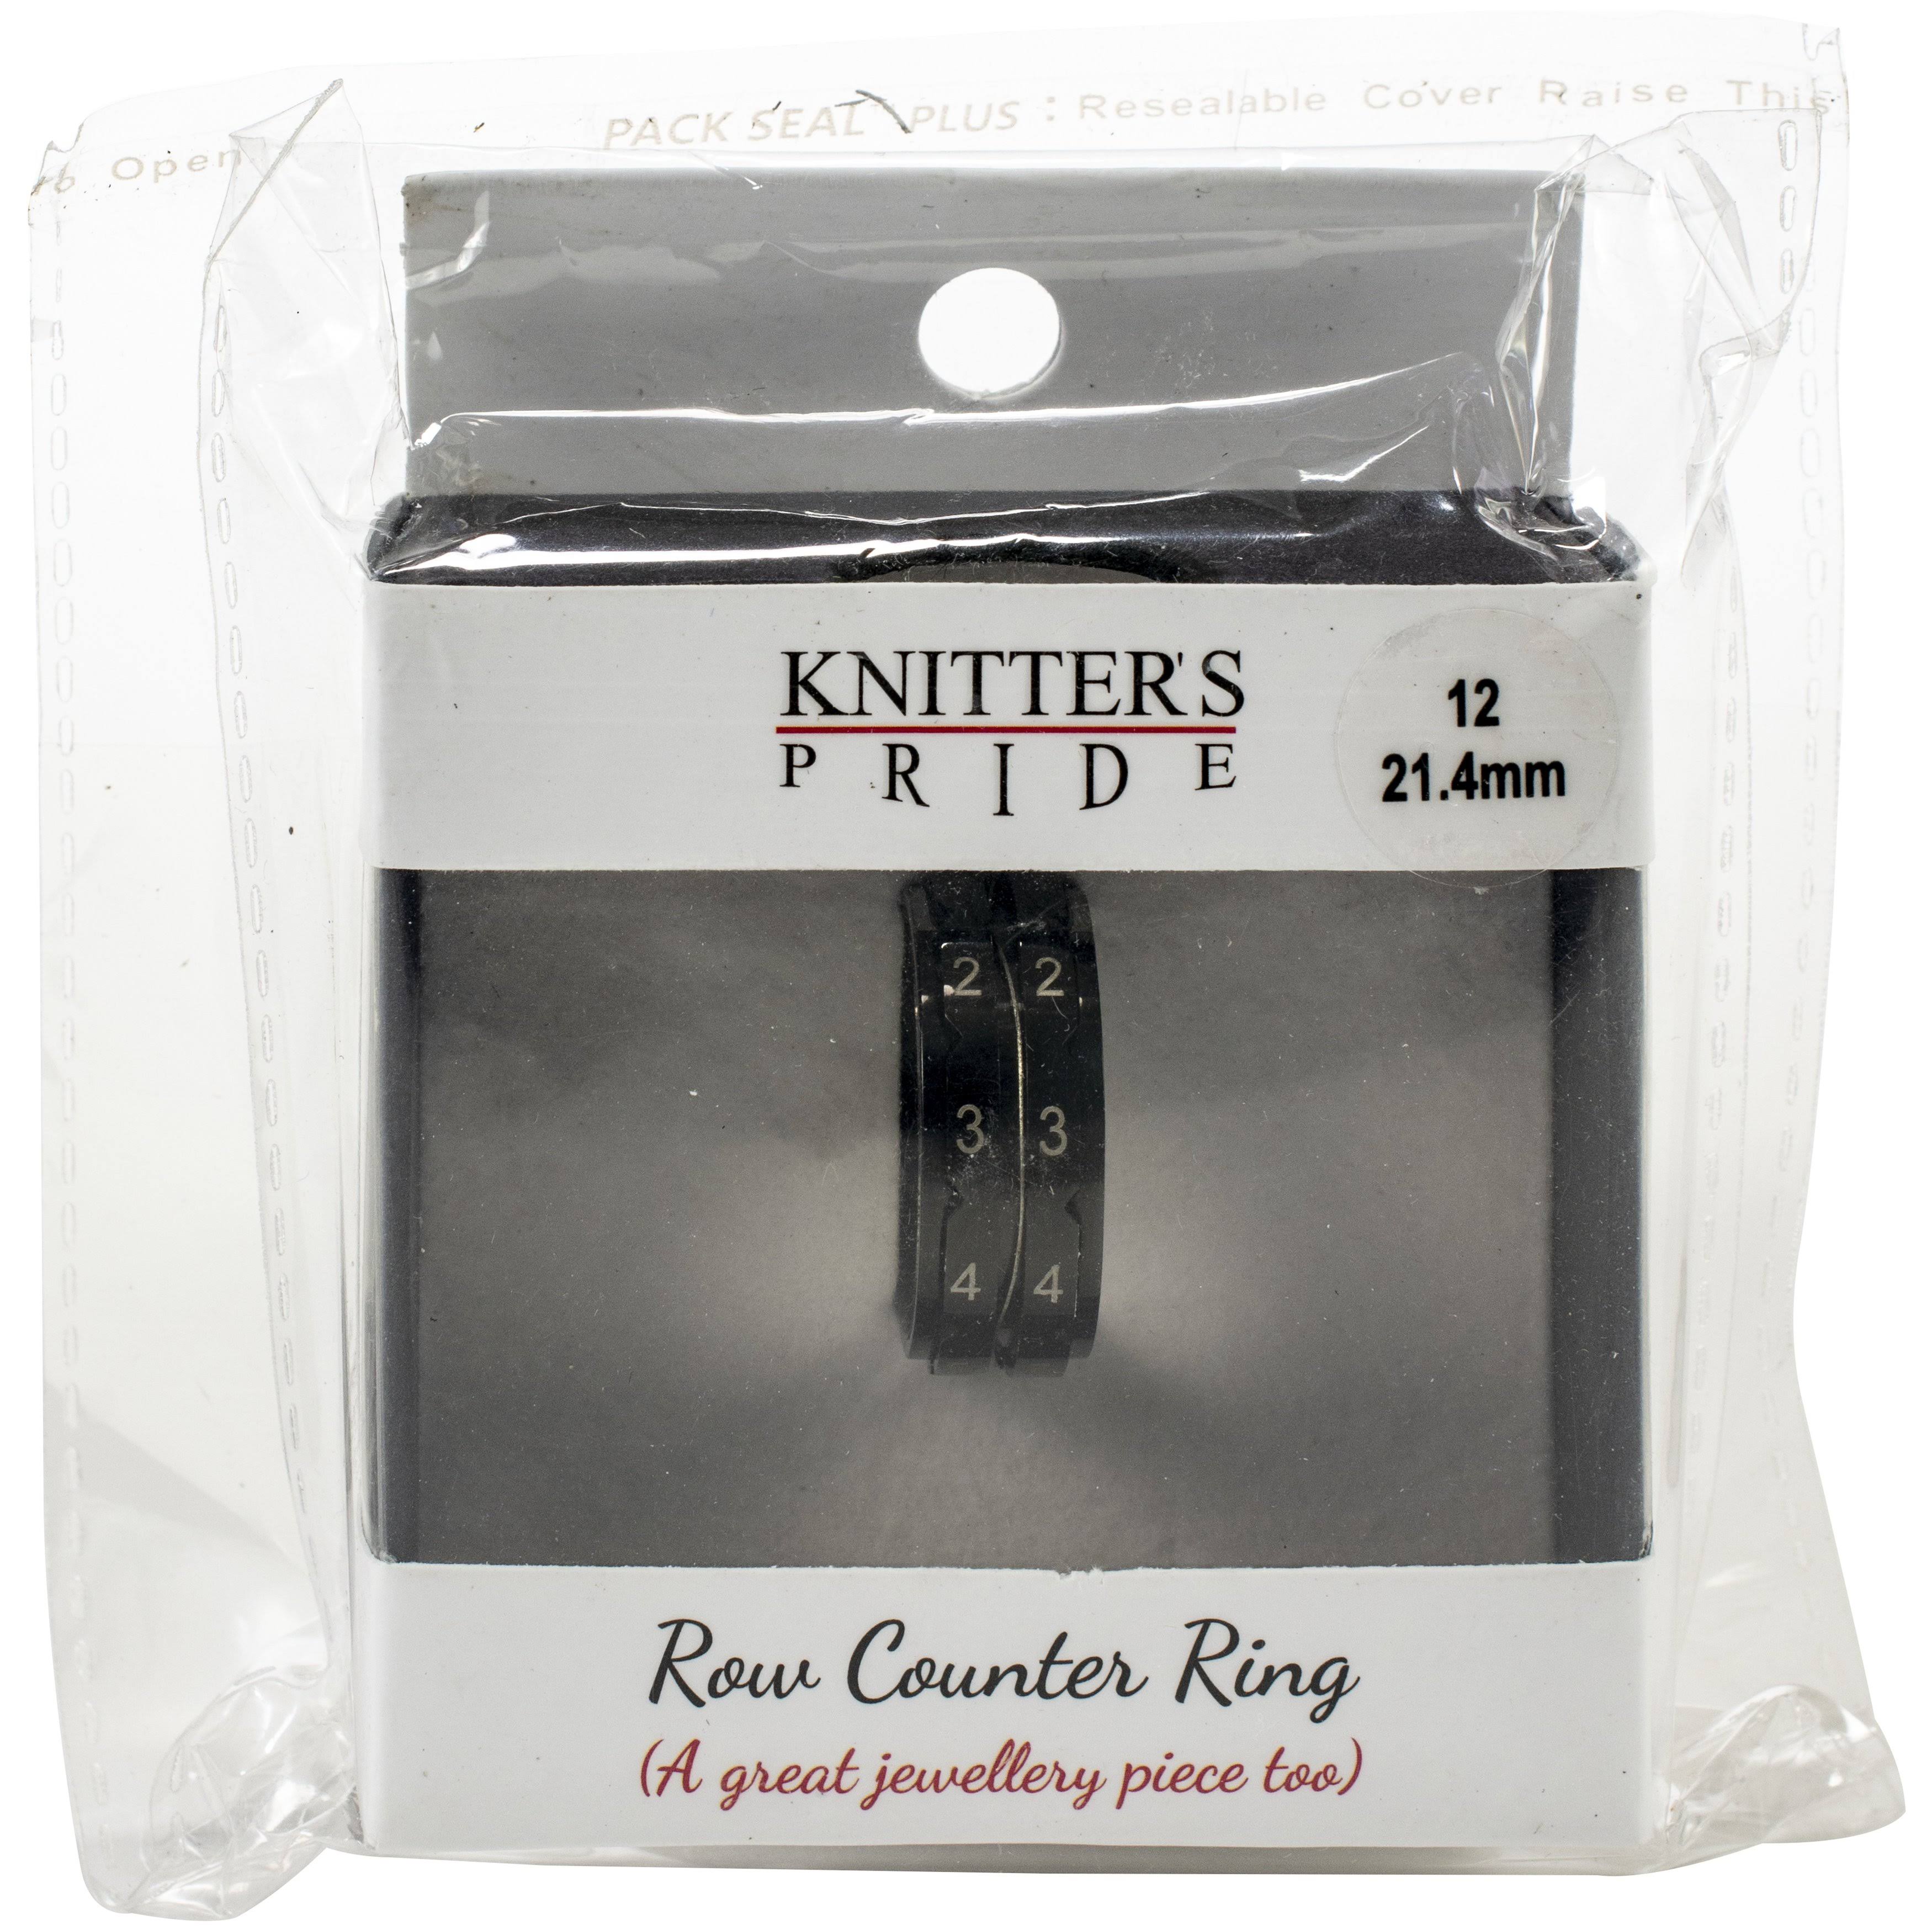 Knitter's Pride Row Counter Ring-Size 12: 21.4mm Diameter